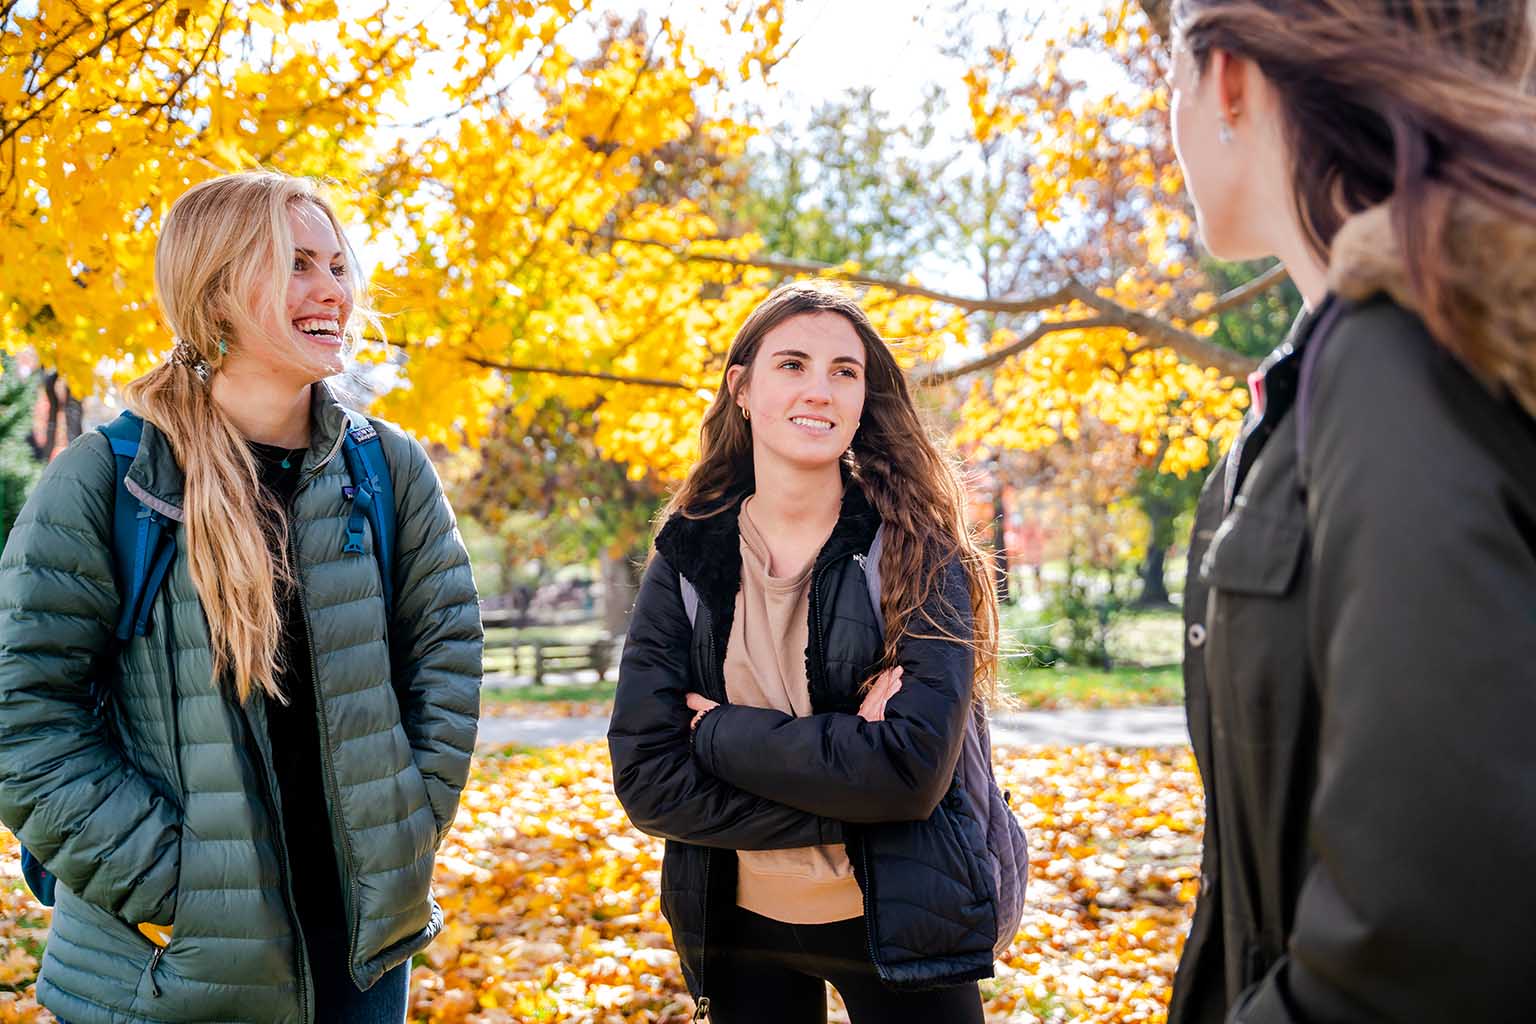 Three women students talk outside in the fall weather